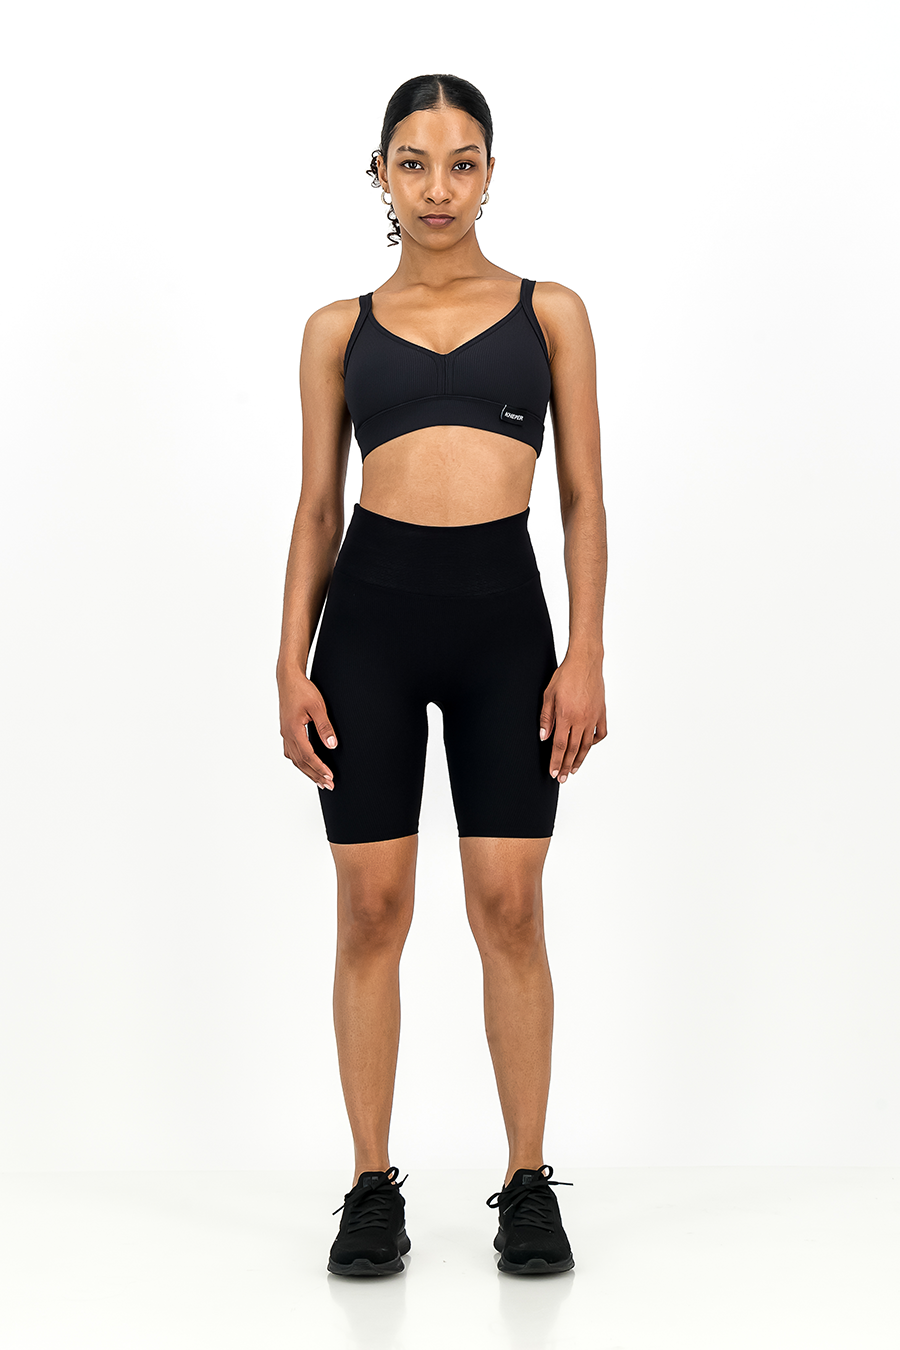 Kheper™ Activewear South Africa | The Activewear for every Women ...